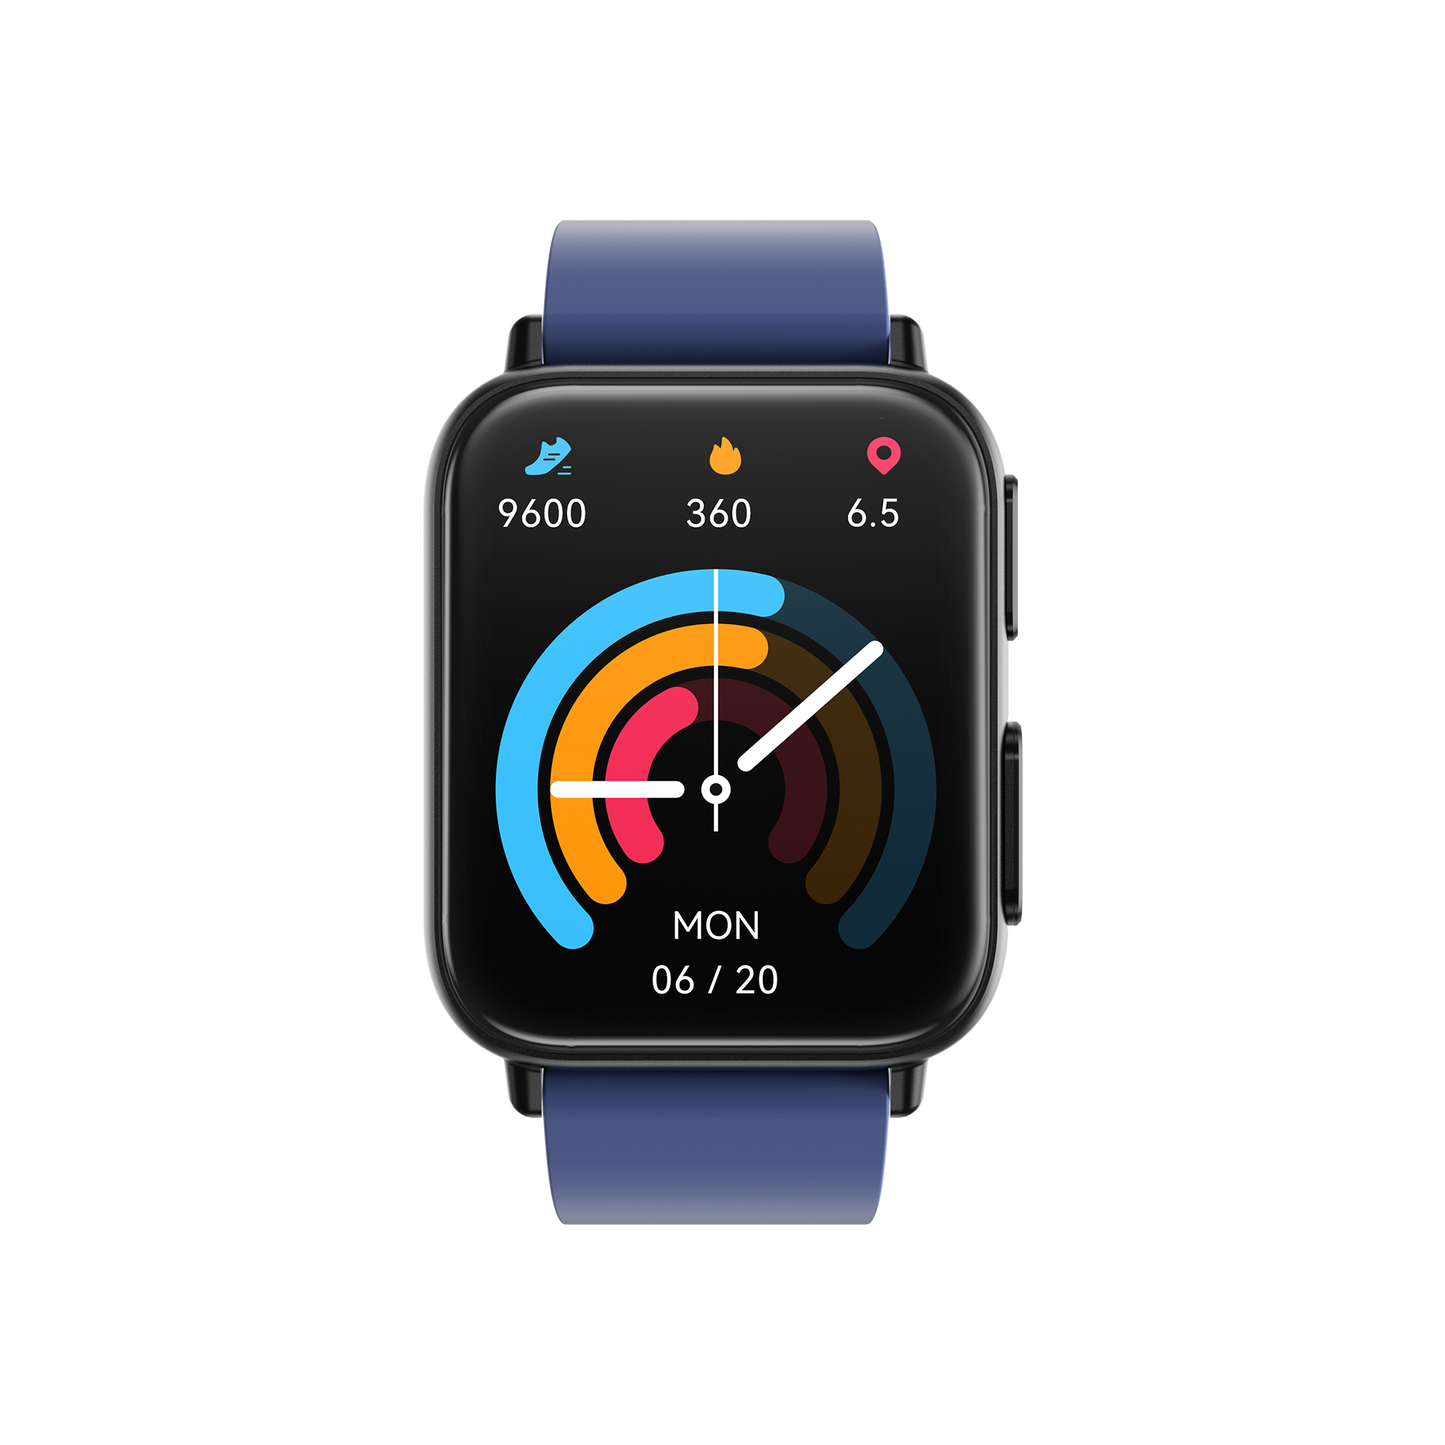 MorePro New Advanced Health Monitoring Smartwatch with Blood Sugar + Blood Pressure + ECG + Sleep Tracking